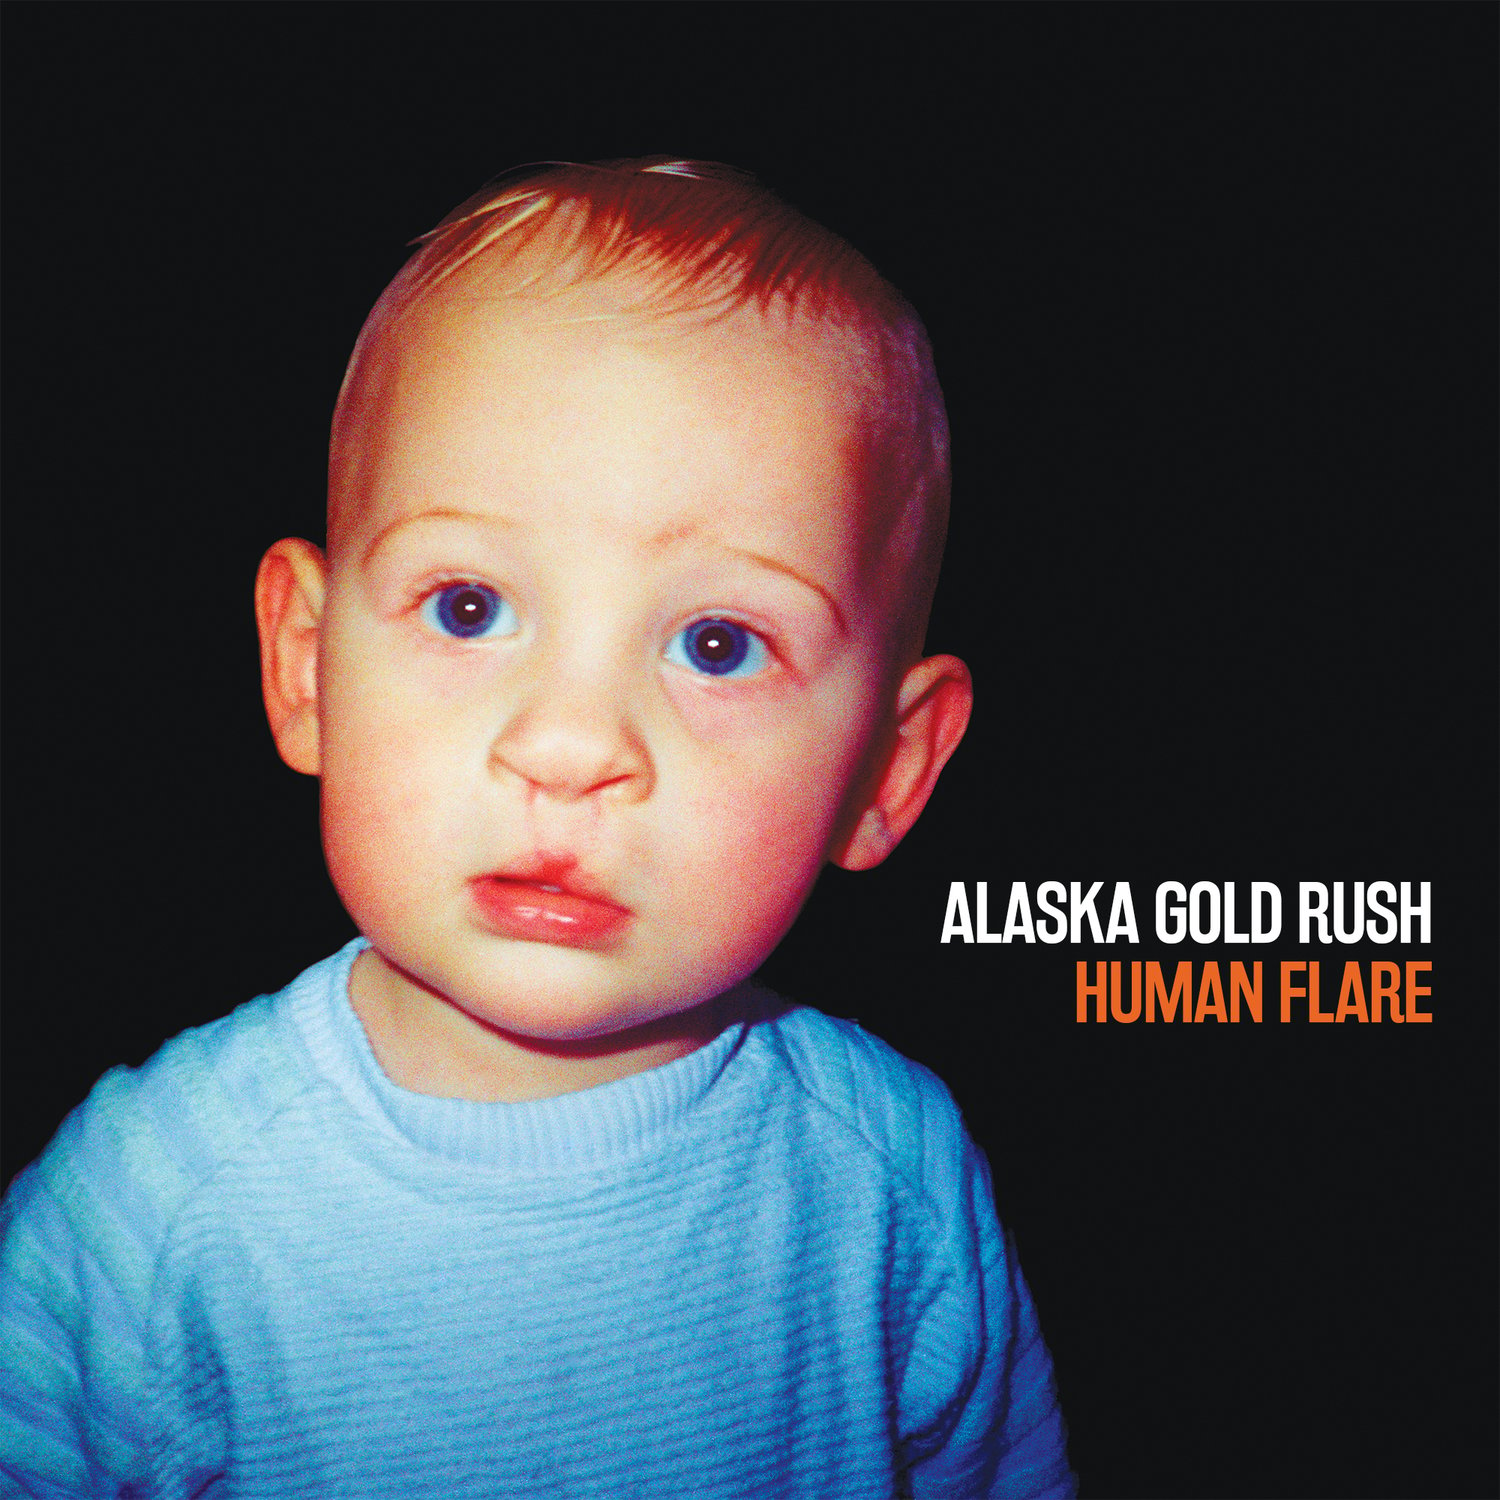 SOLD OUT! Human Flare - Alaska Gold Rush